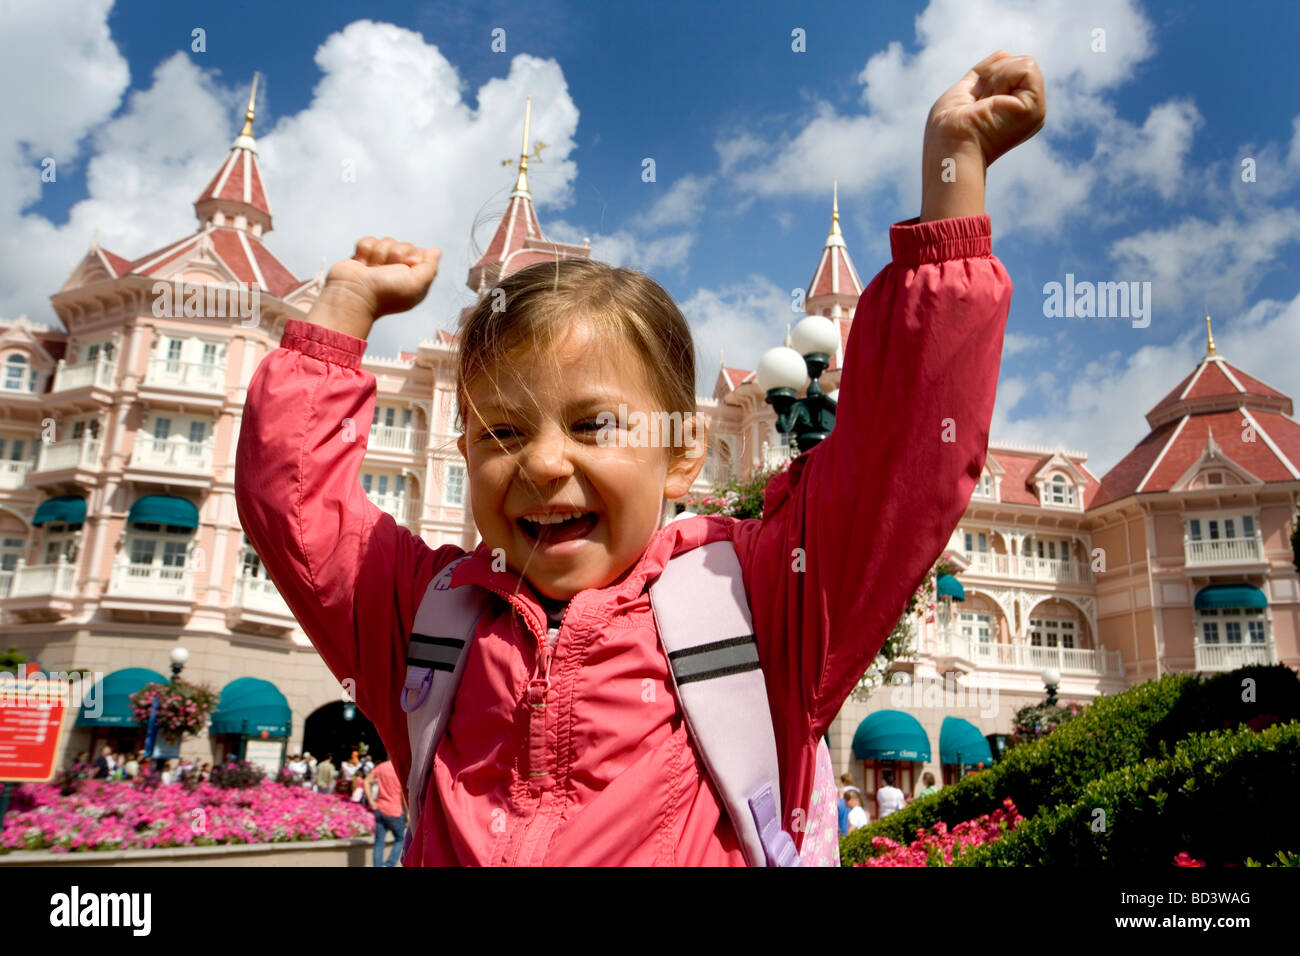 A child shows excitement at the entrance to Disneyland Paris, France Stock Photo